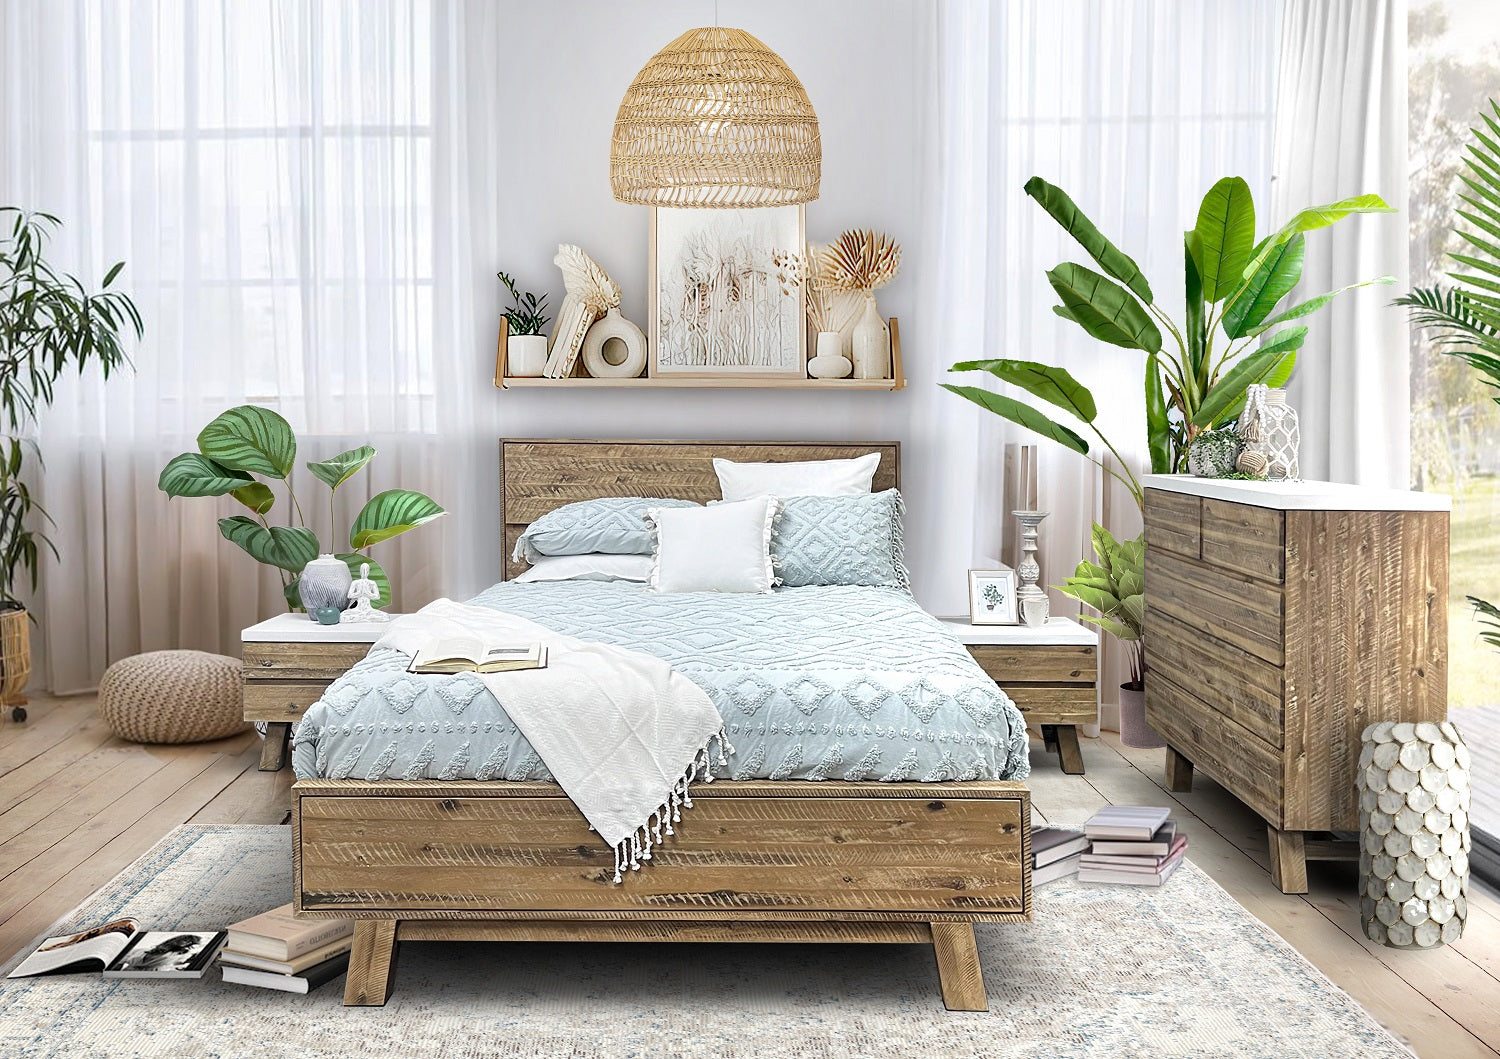 How To Choose The Perfect Bedroom Furniture